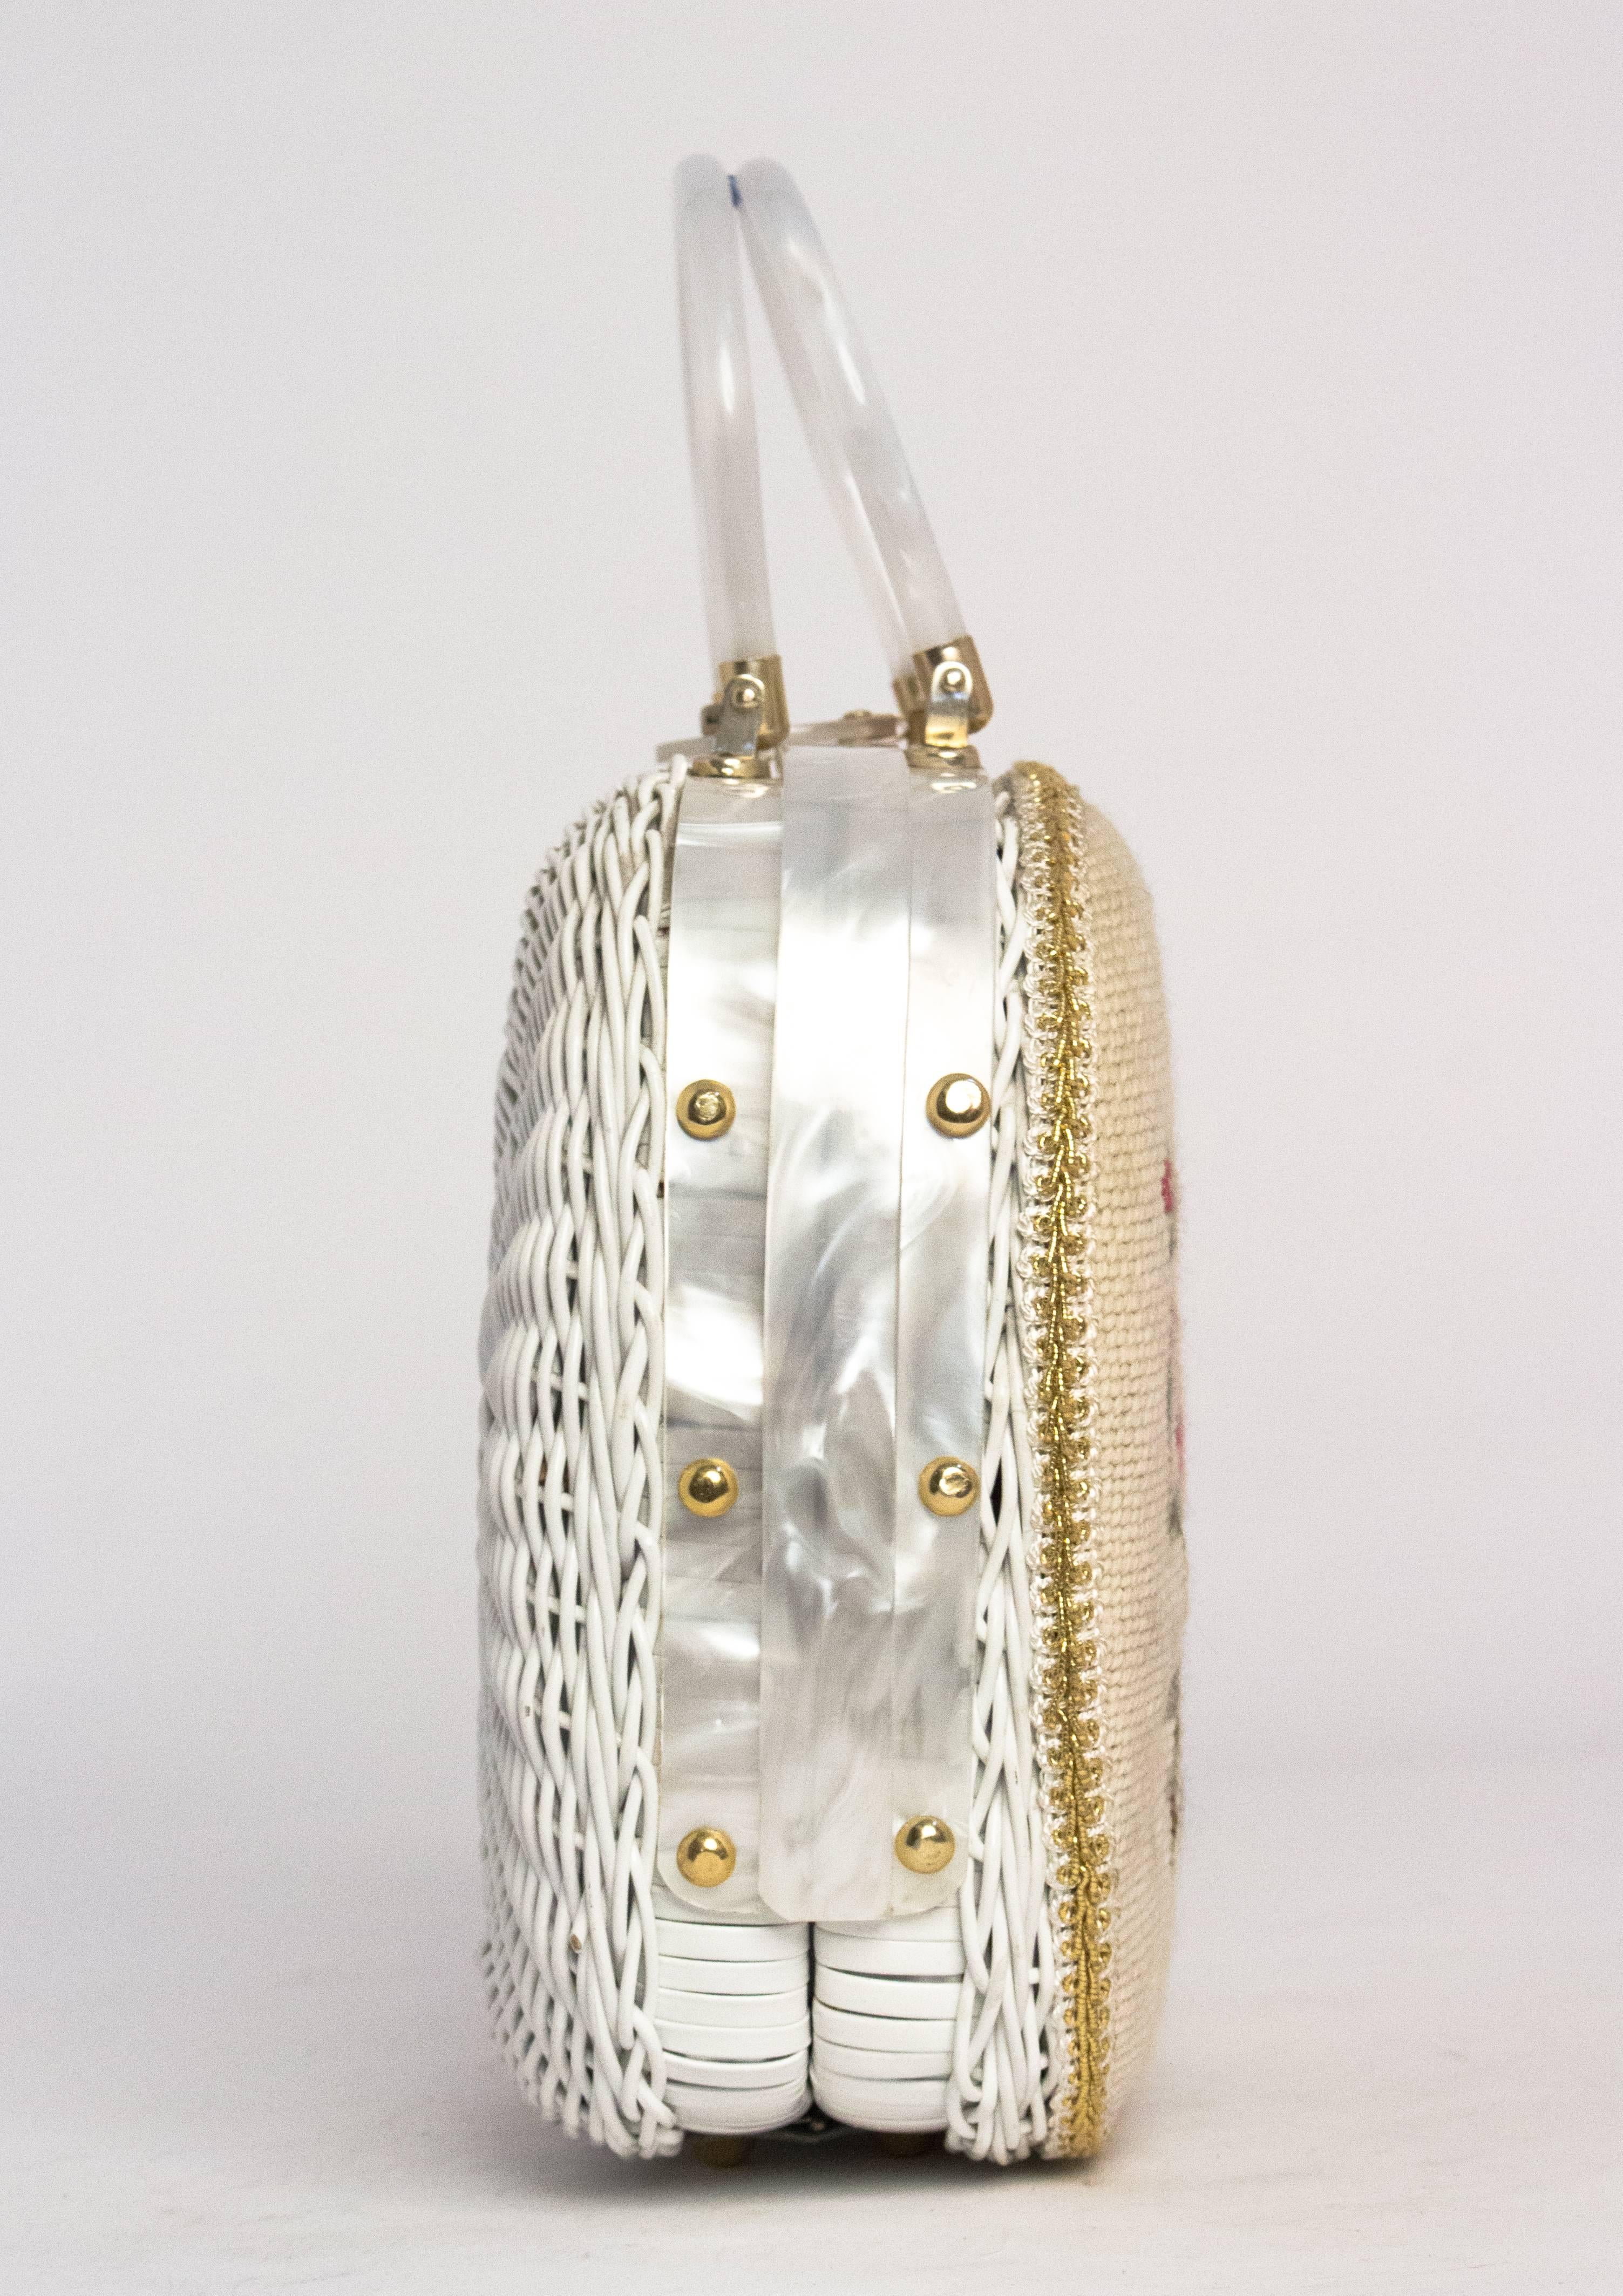 60s Floral Needle Point Lucite Handbag with woven frame. Gold tone hardware. Two interior compartments, one is closed with a metal zipper. Plastic lining. 

Measurements:

Width: 11.5